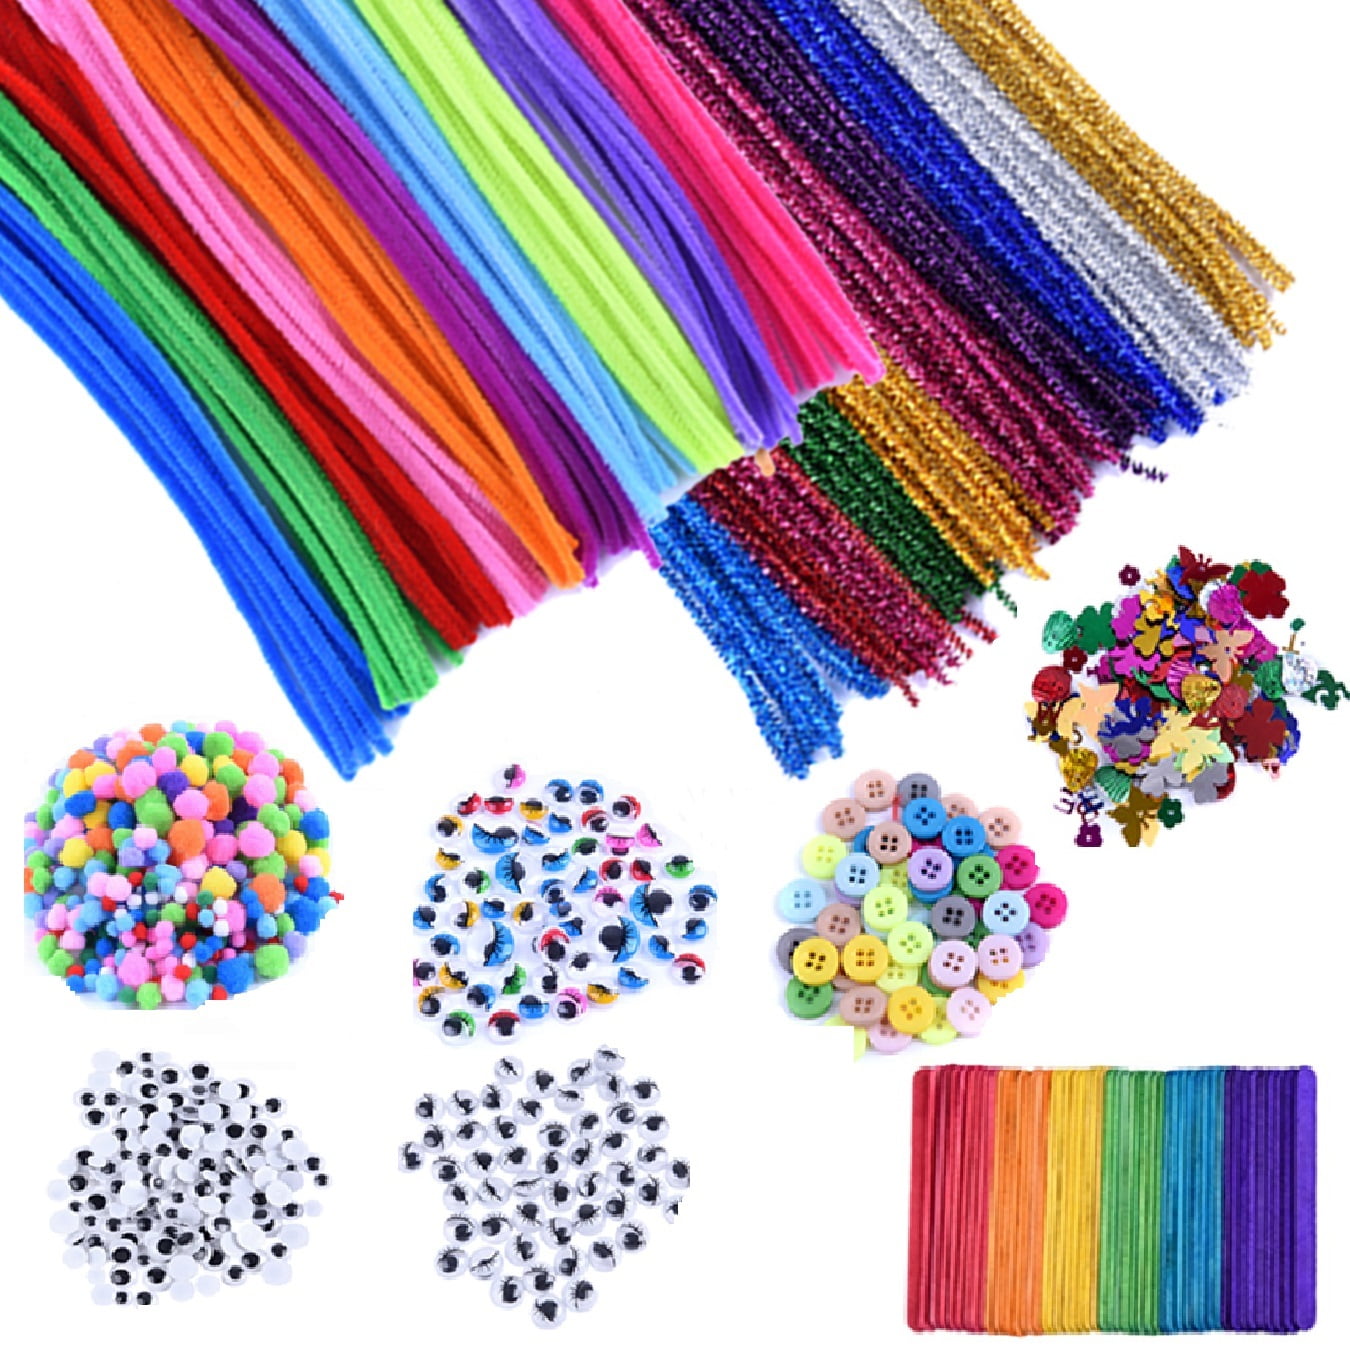  Zlulary Upgraded Art and Craft Supplies for Kids, Craft  Supplies, Craft Kit with Manual, Pipe Cleaners Craft Supplies, Pom poms,  Storage Box, Arts and Crafts Kit for DIY Craft Art Project 